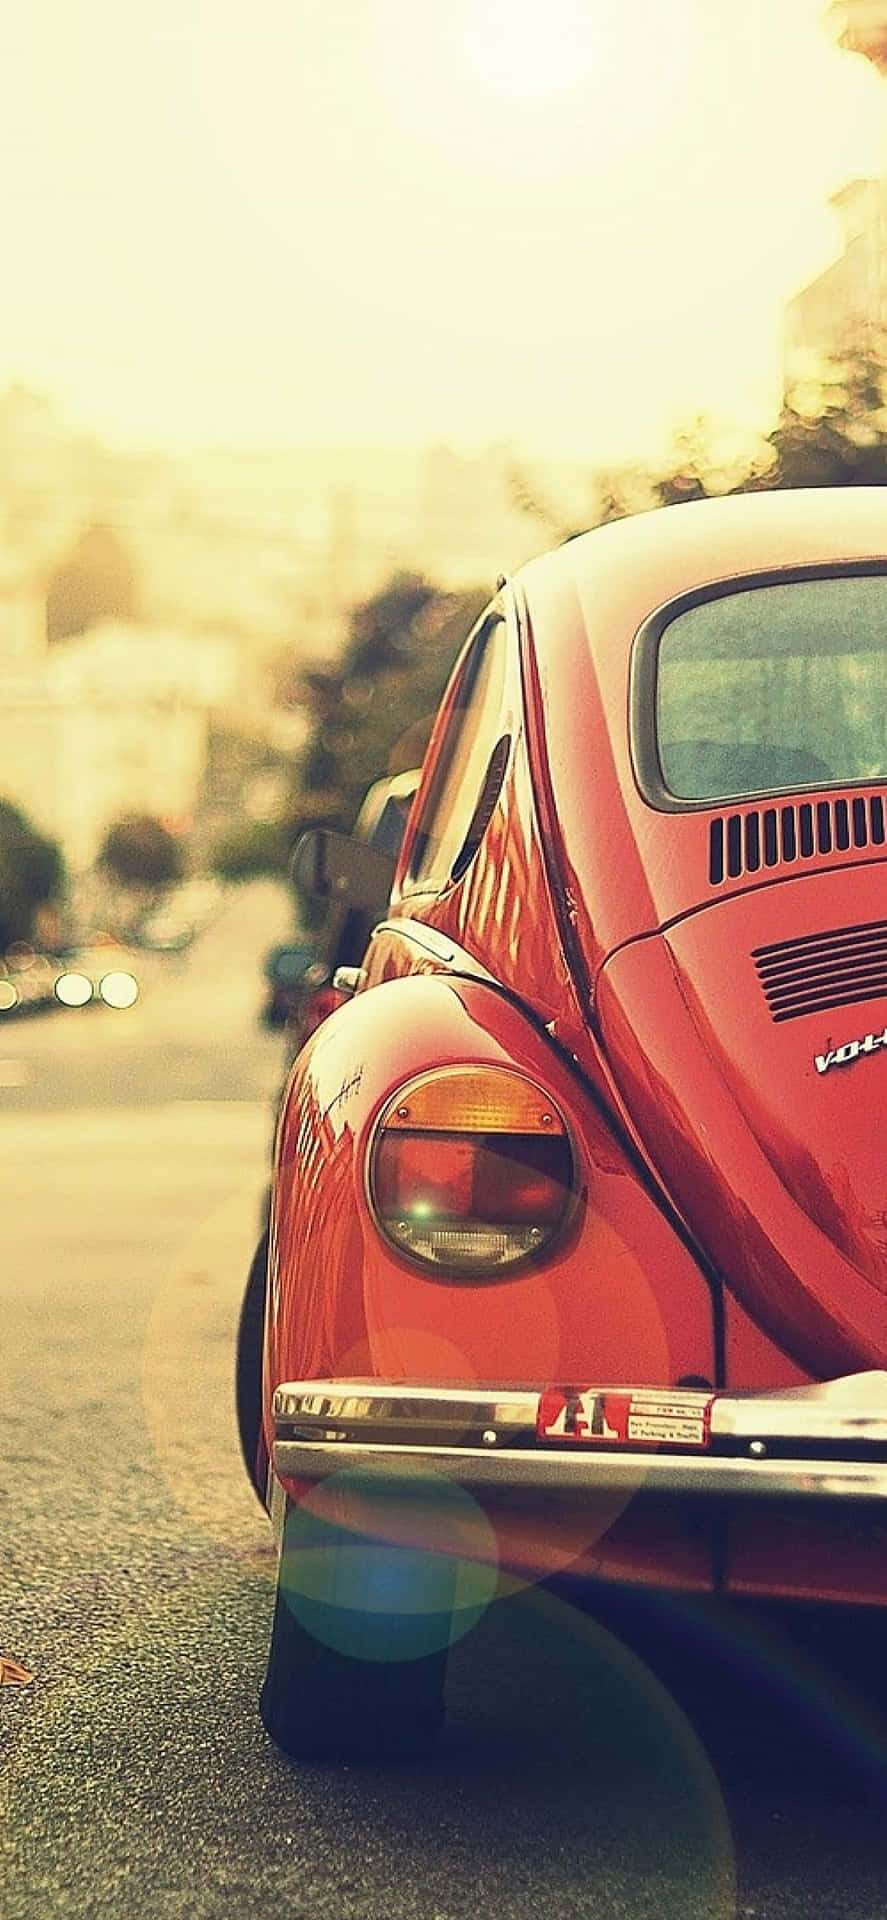 A Red Volkswagen Beetle Parked On The Street Wallpaper